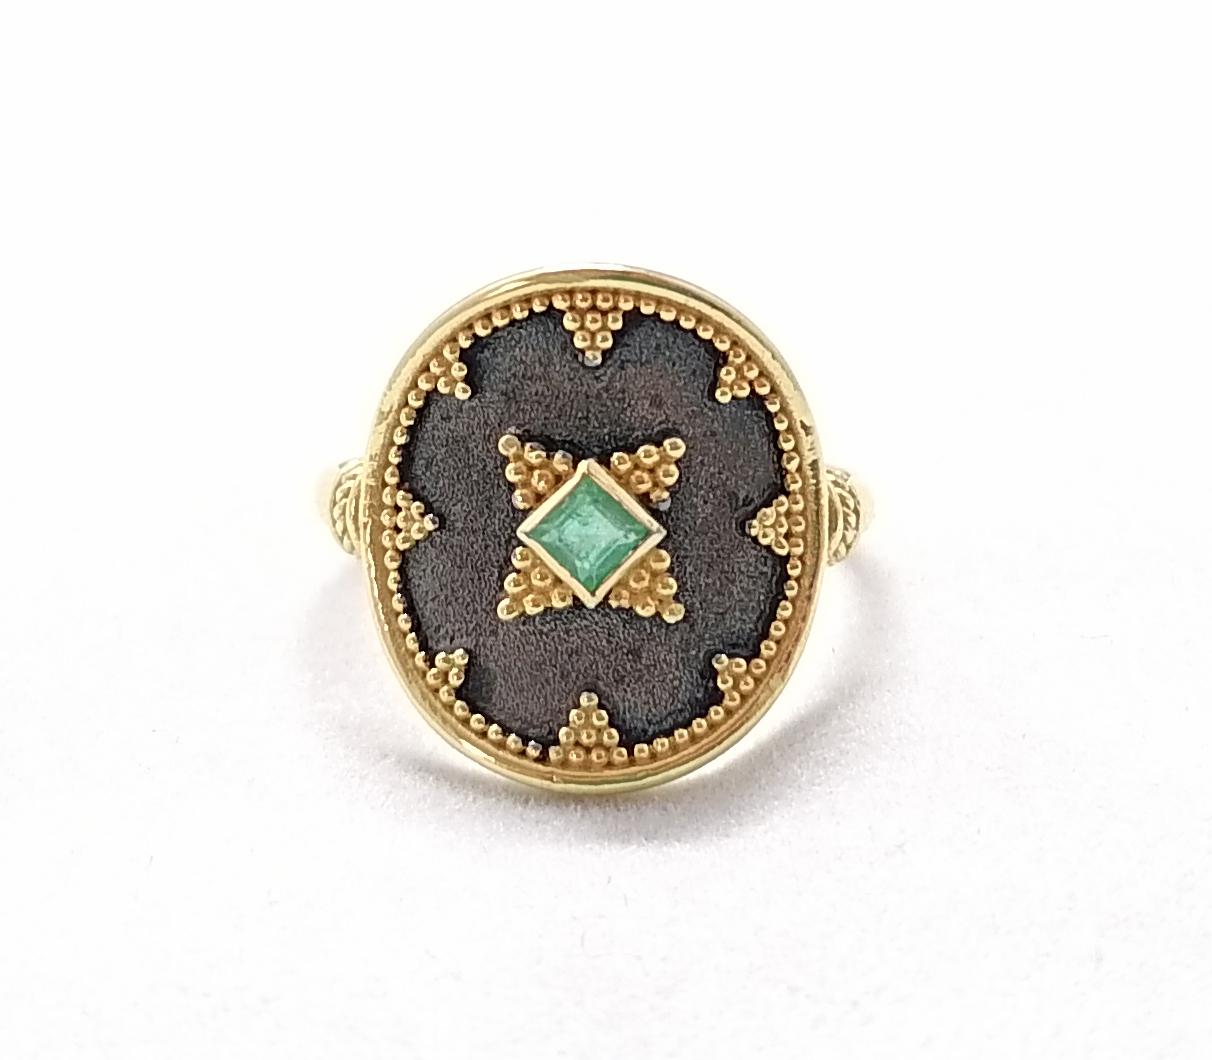 S.Georgios designer two-tone Stunning Ring is handmade in solid 18 Karat Yellow Gold and is microscopically decorated with Byzantine-style granulation work. This beautiful ring features an elegant center Princess cut natural Emerald total weight of